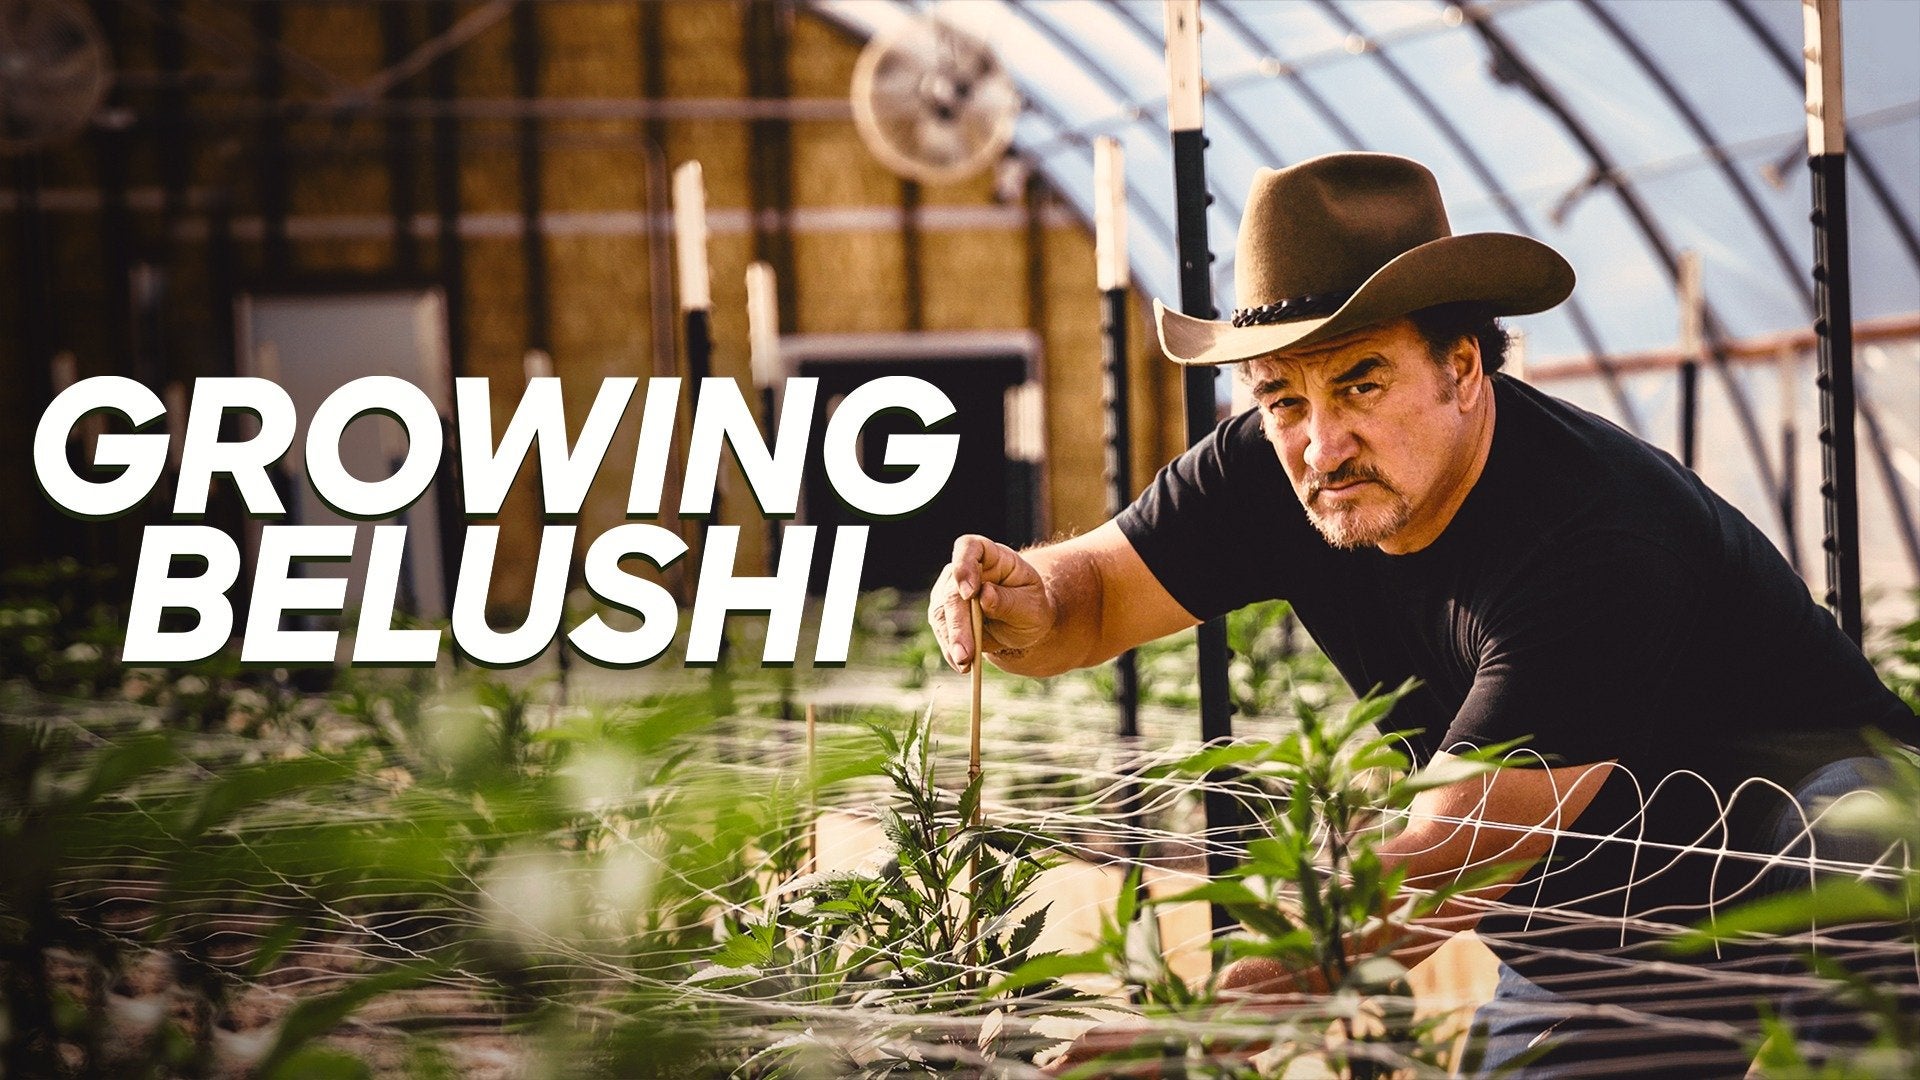 Growing Belushi S02E02 720p  The Pot Thickens